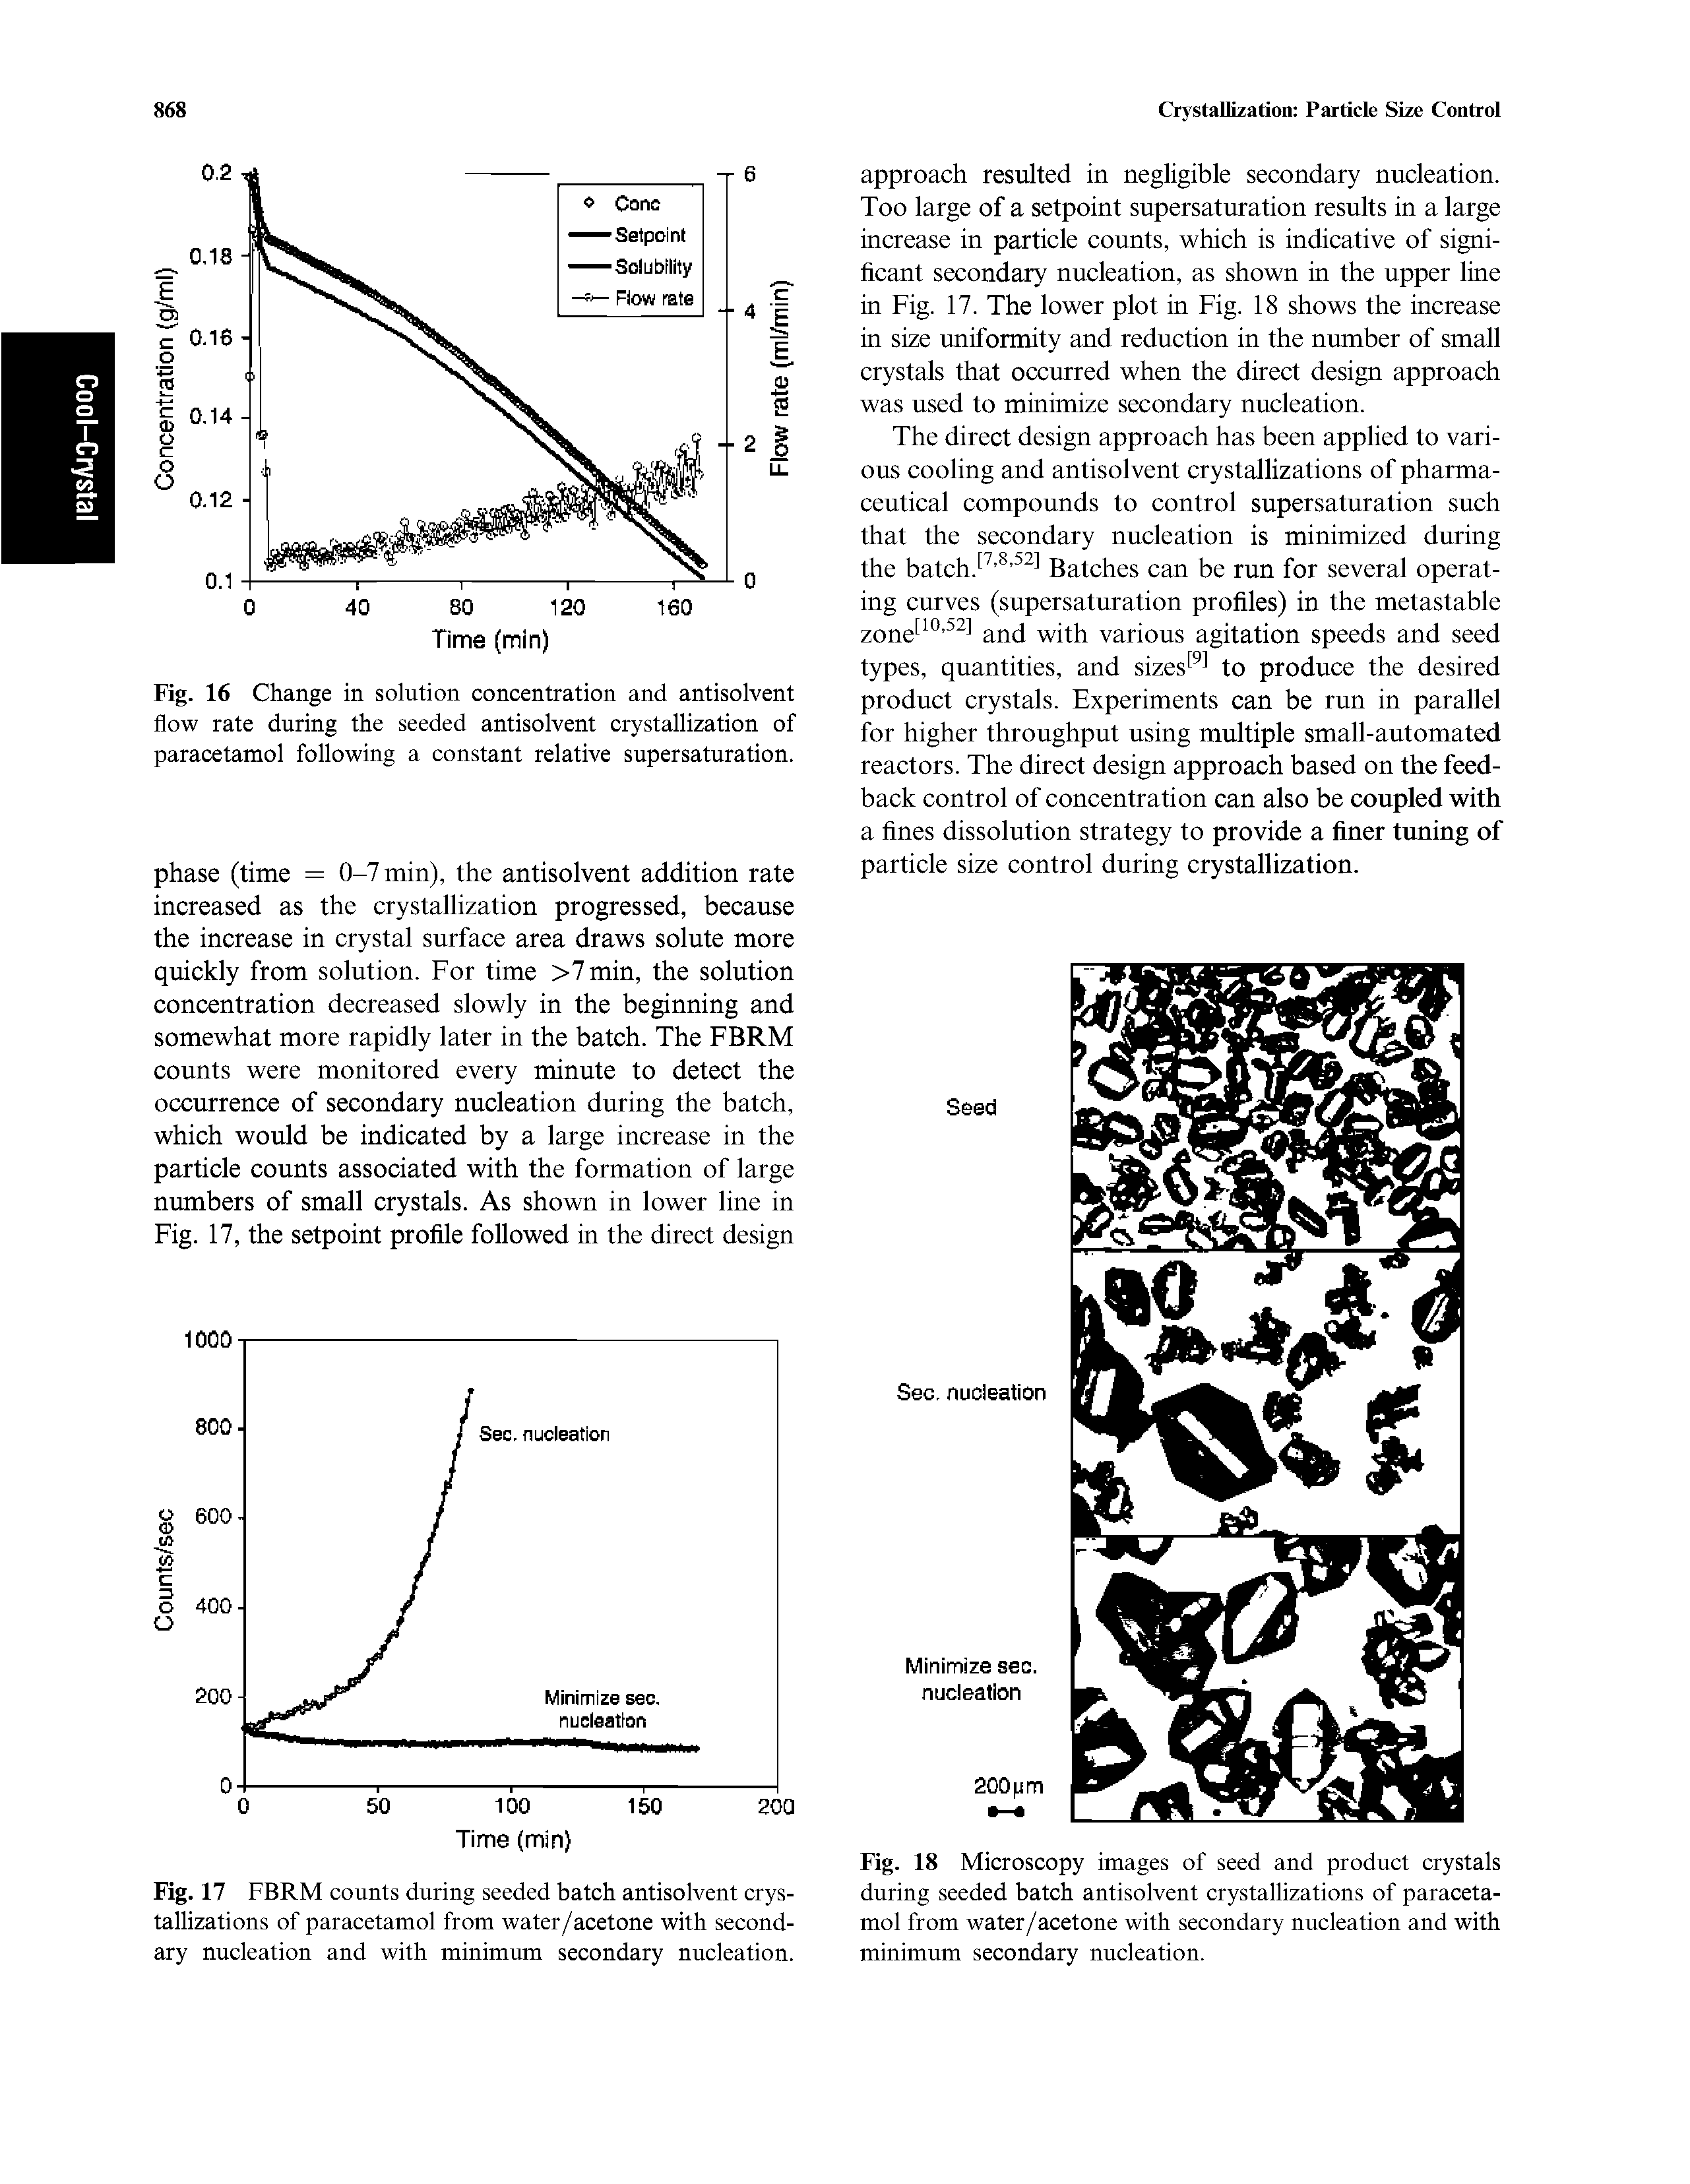 Fig. 16 Change in solution concentration and antisolvent flow rate during the seeded antisolvent crystallization of paracetamol following a constant relative supersaturation.